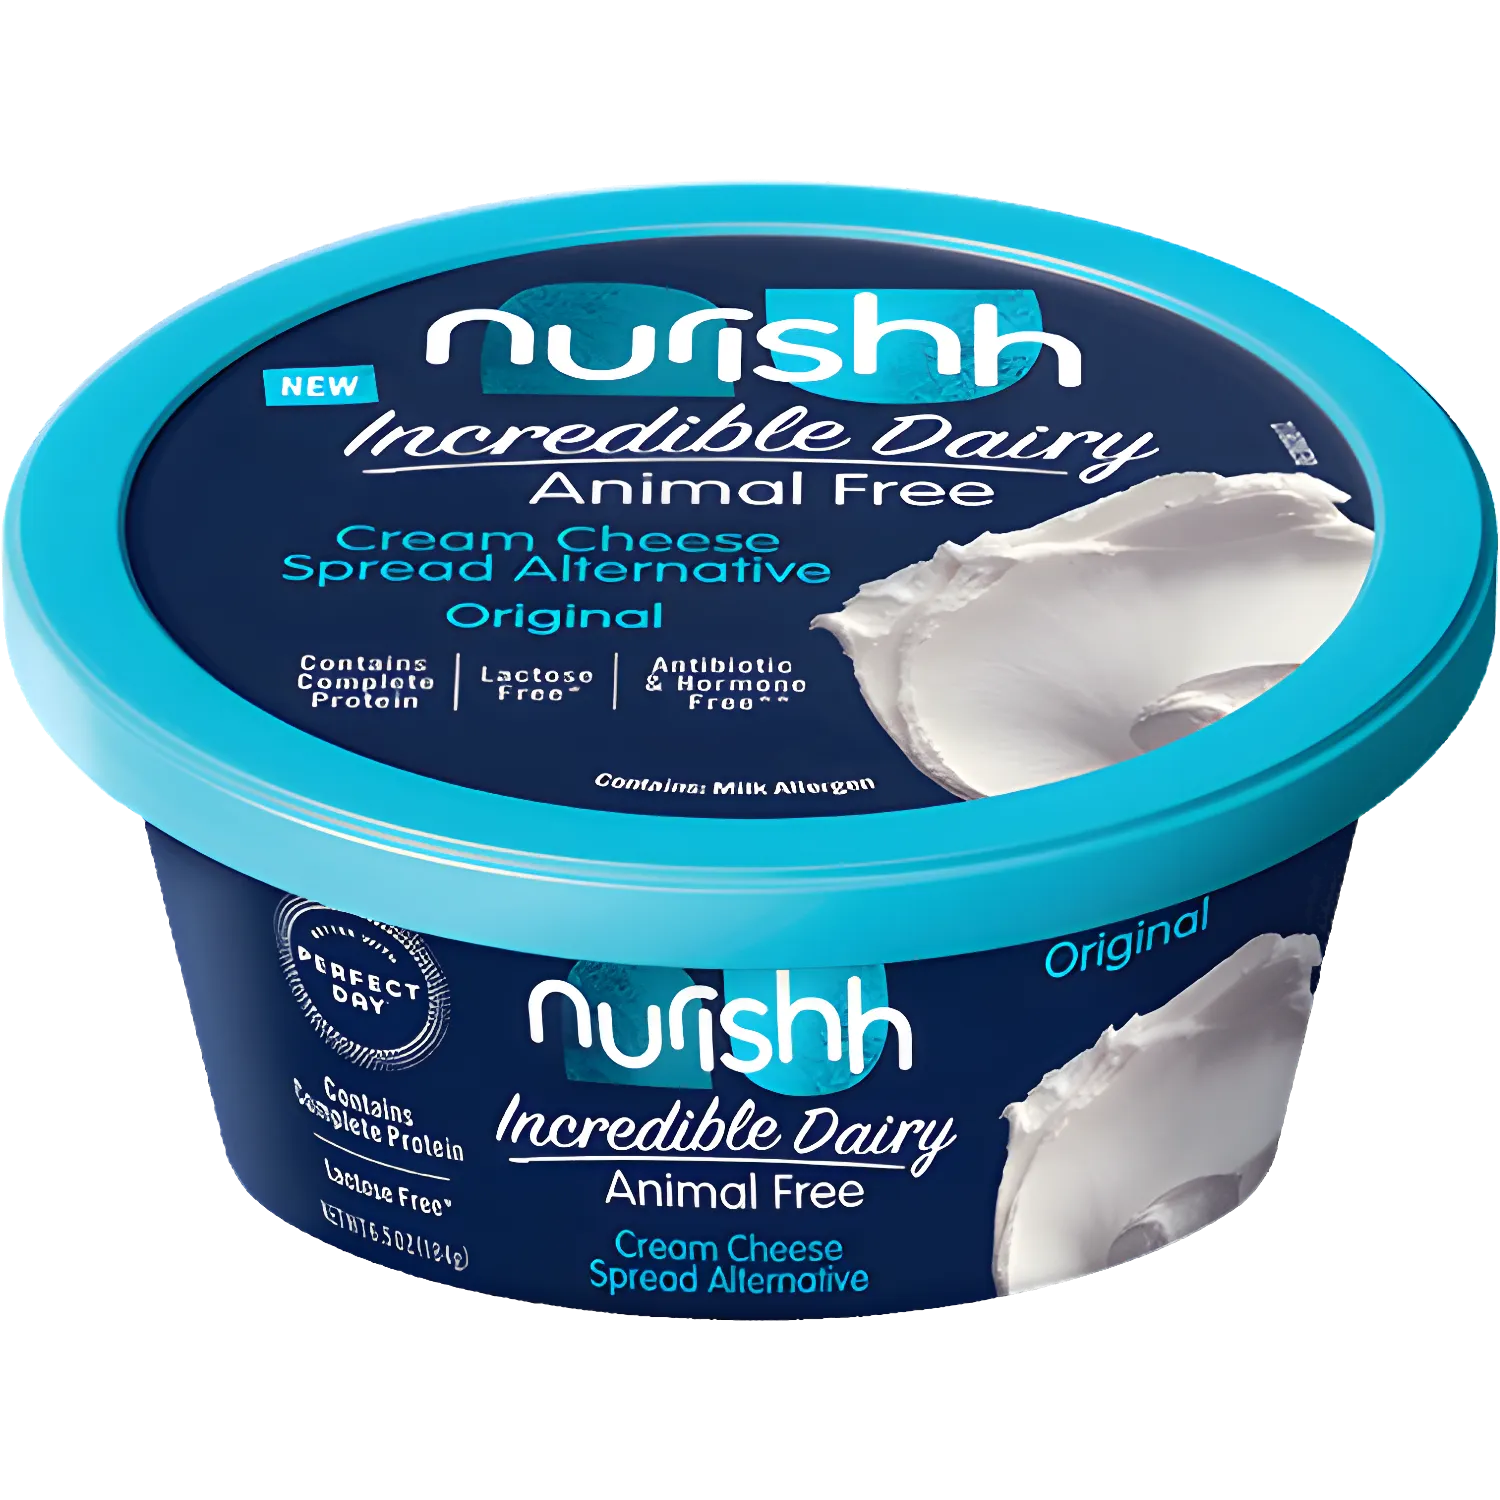 Free Nurishh Animal Free Cream Cheese For Free At Walmart After Cashback